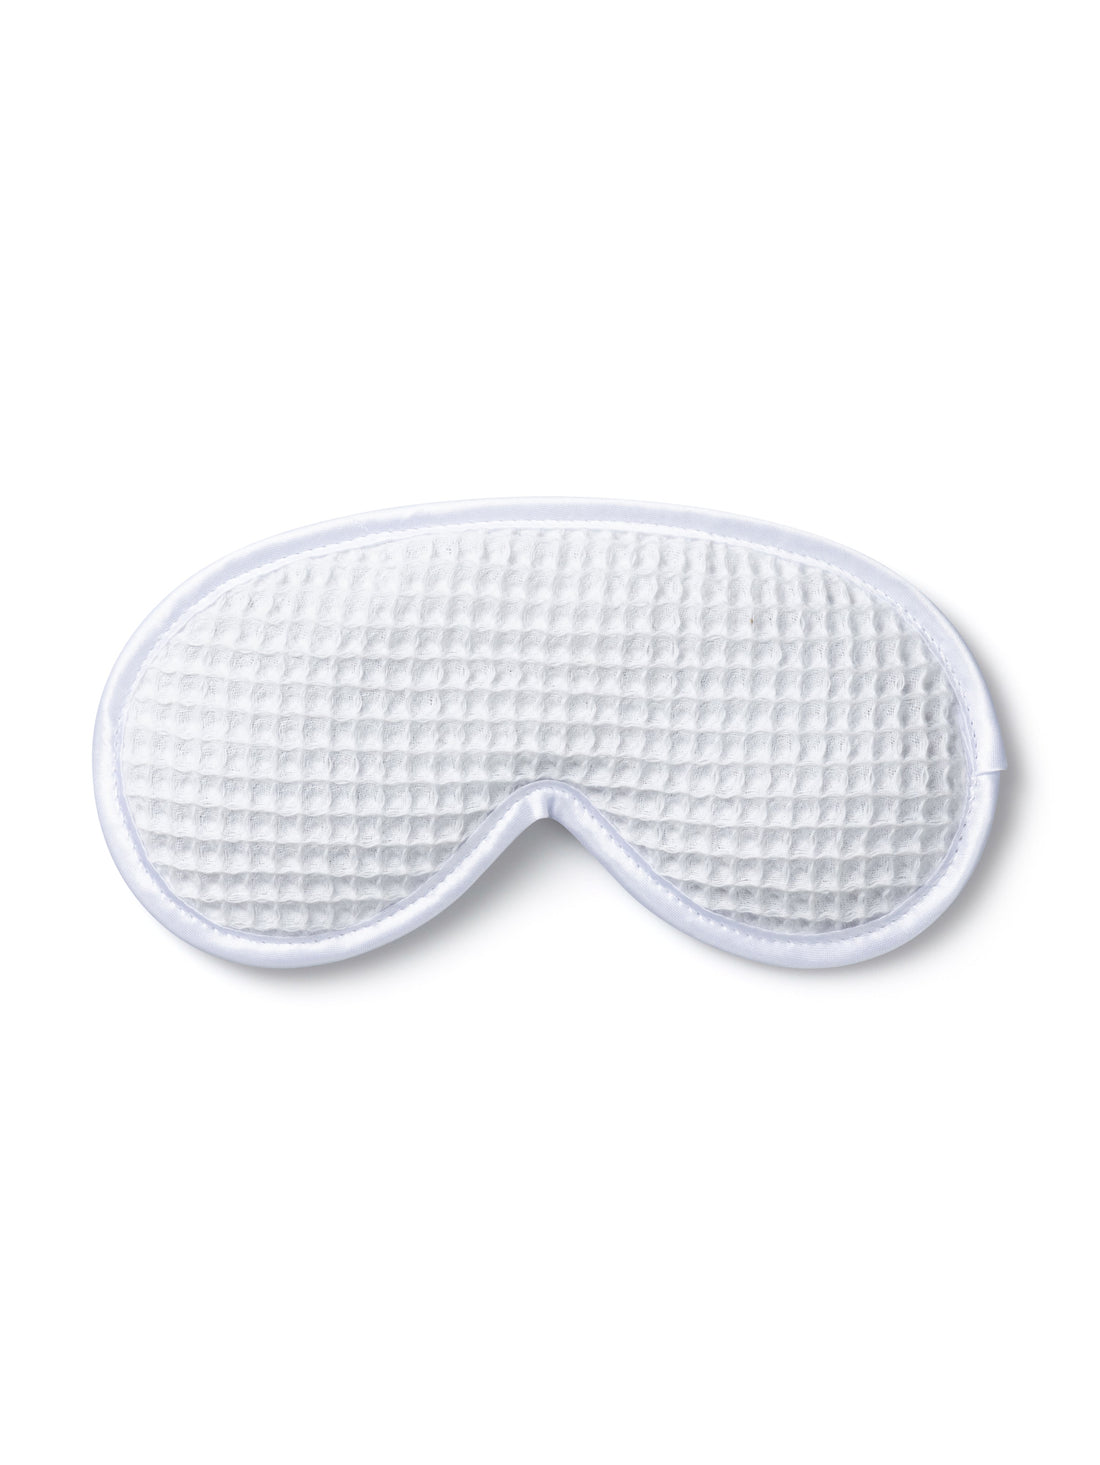 White waffle eye mask filled with lavender, crafted by Chalk for relaxation and restful sleep.